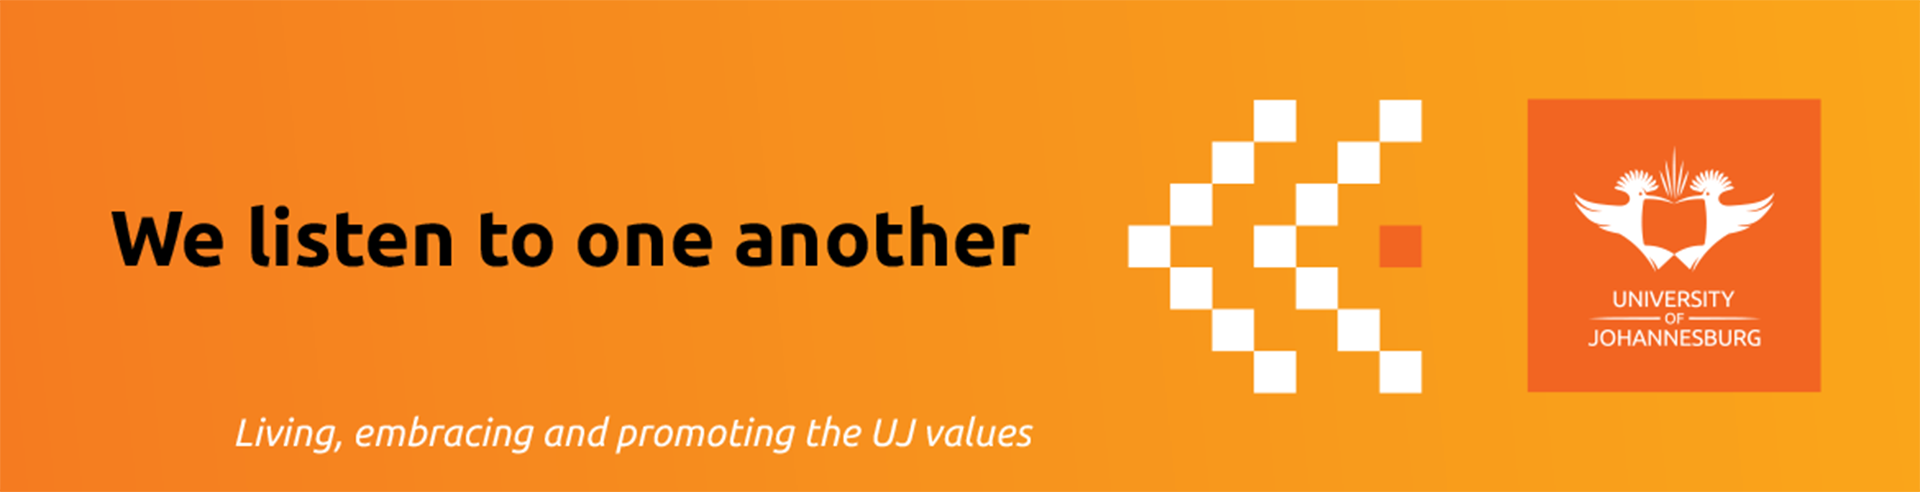 Uj Values Expressions Posters 2020 Ulink 1170x300mm 21